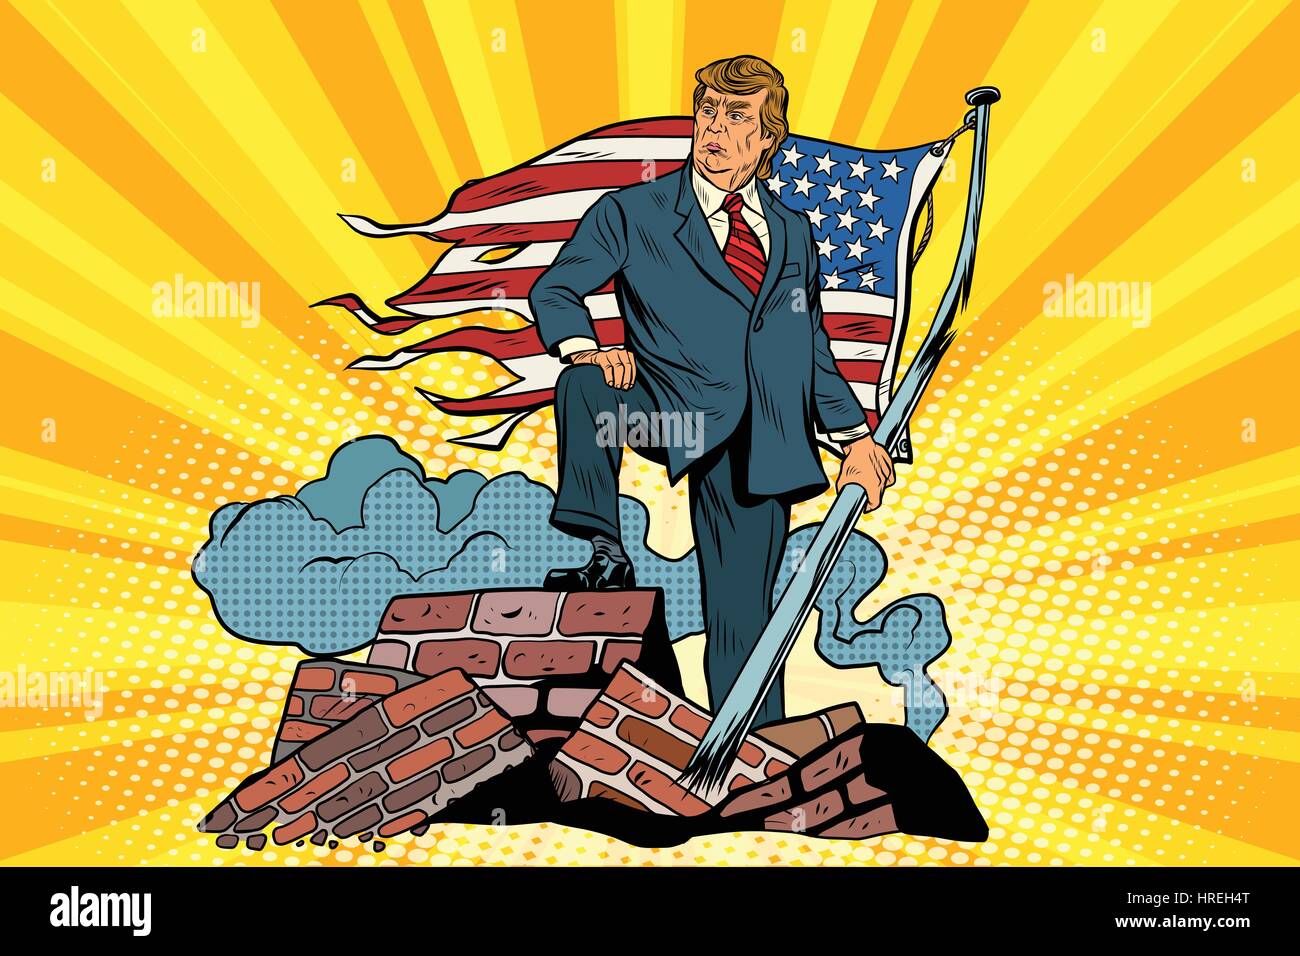 President Donald trump with USA flag, on the ruins. Comic book vintage pop art retro style illustration vector Stock Vector